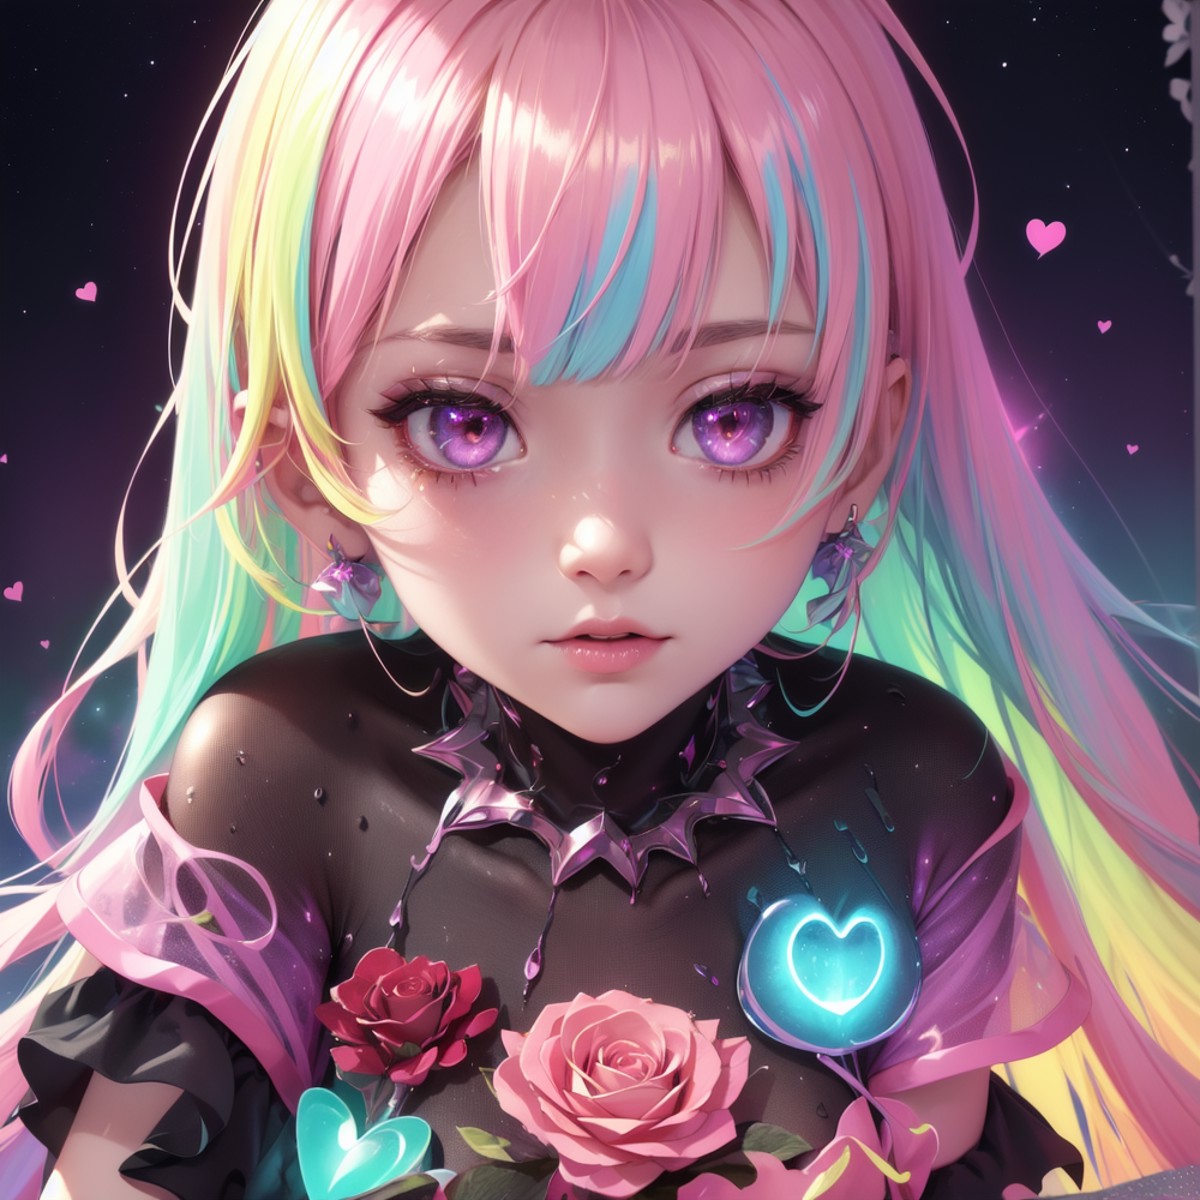 aurora behind her, down by the beach at night, anime girl with hearts, in the style of neon hallucinations, rainbowcore, d...